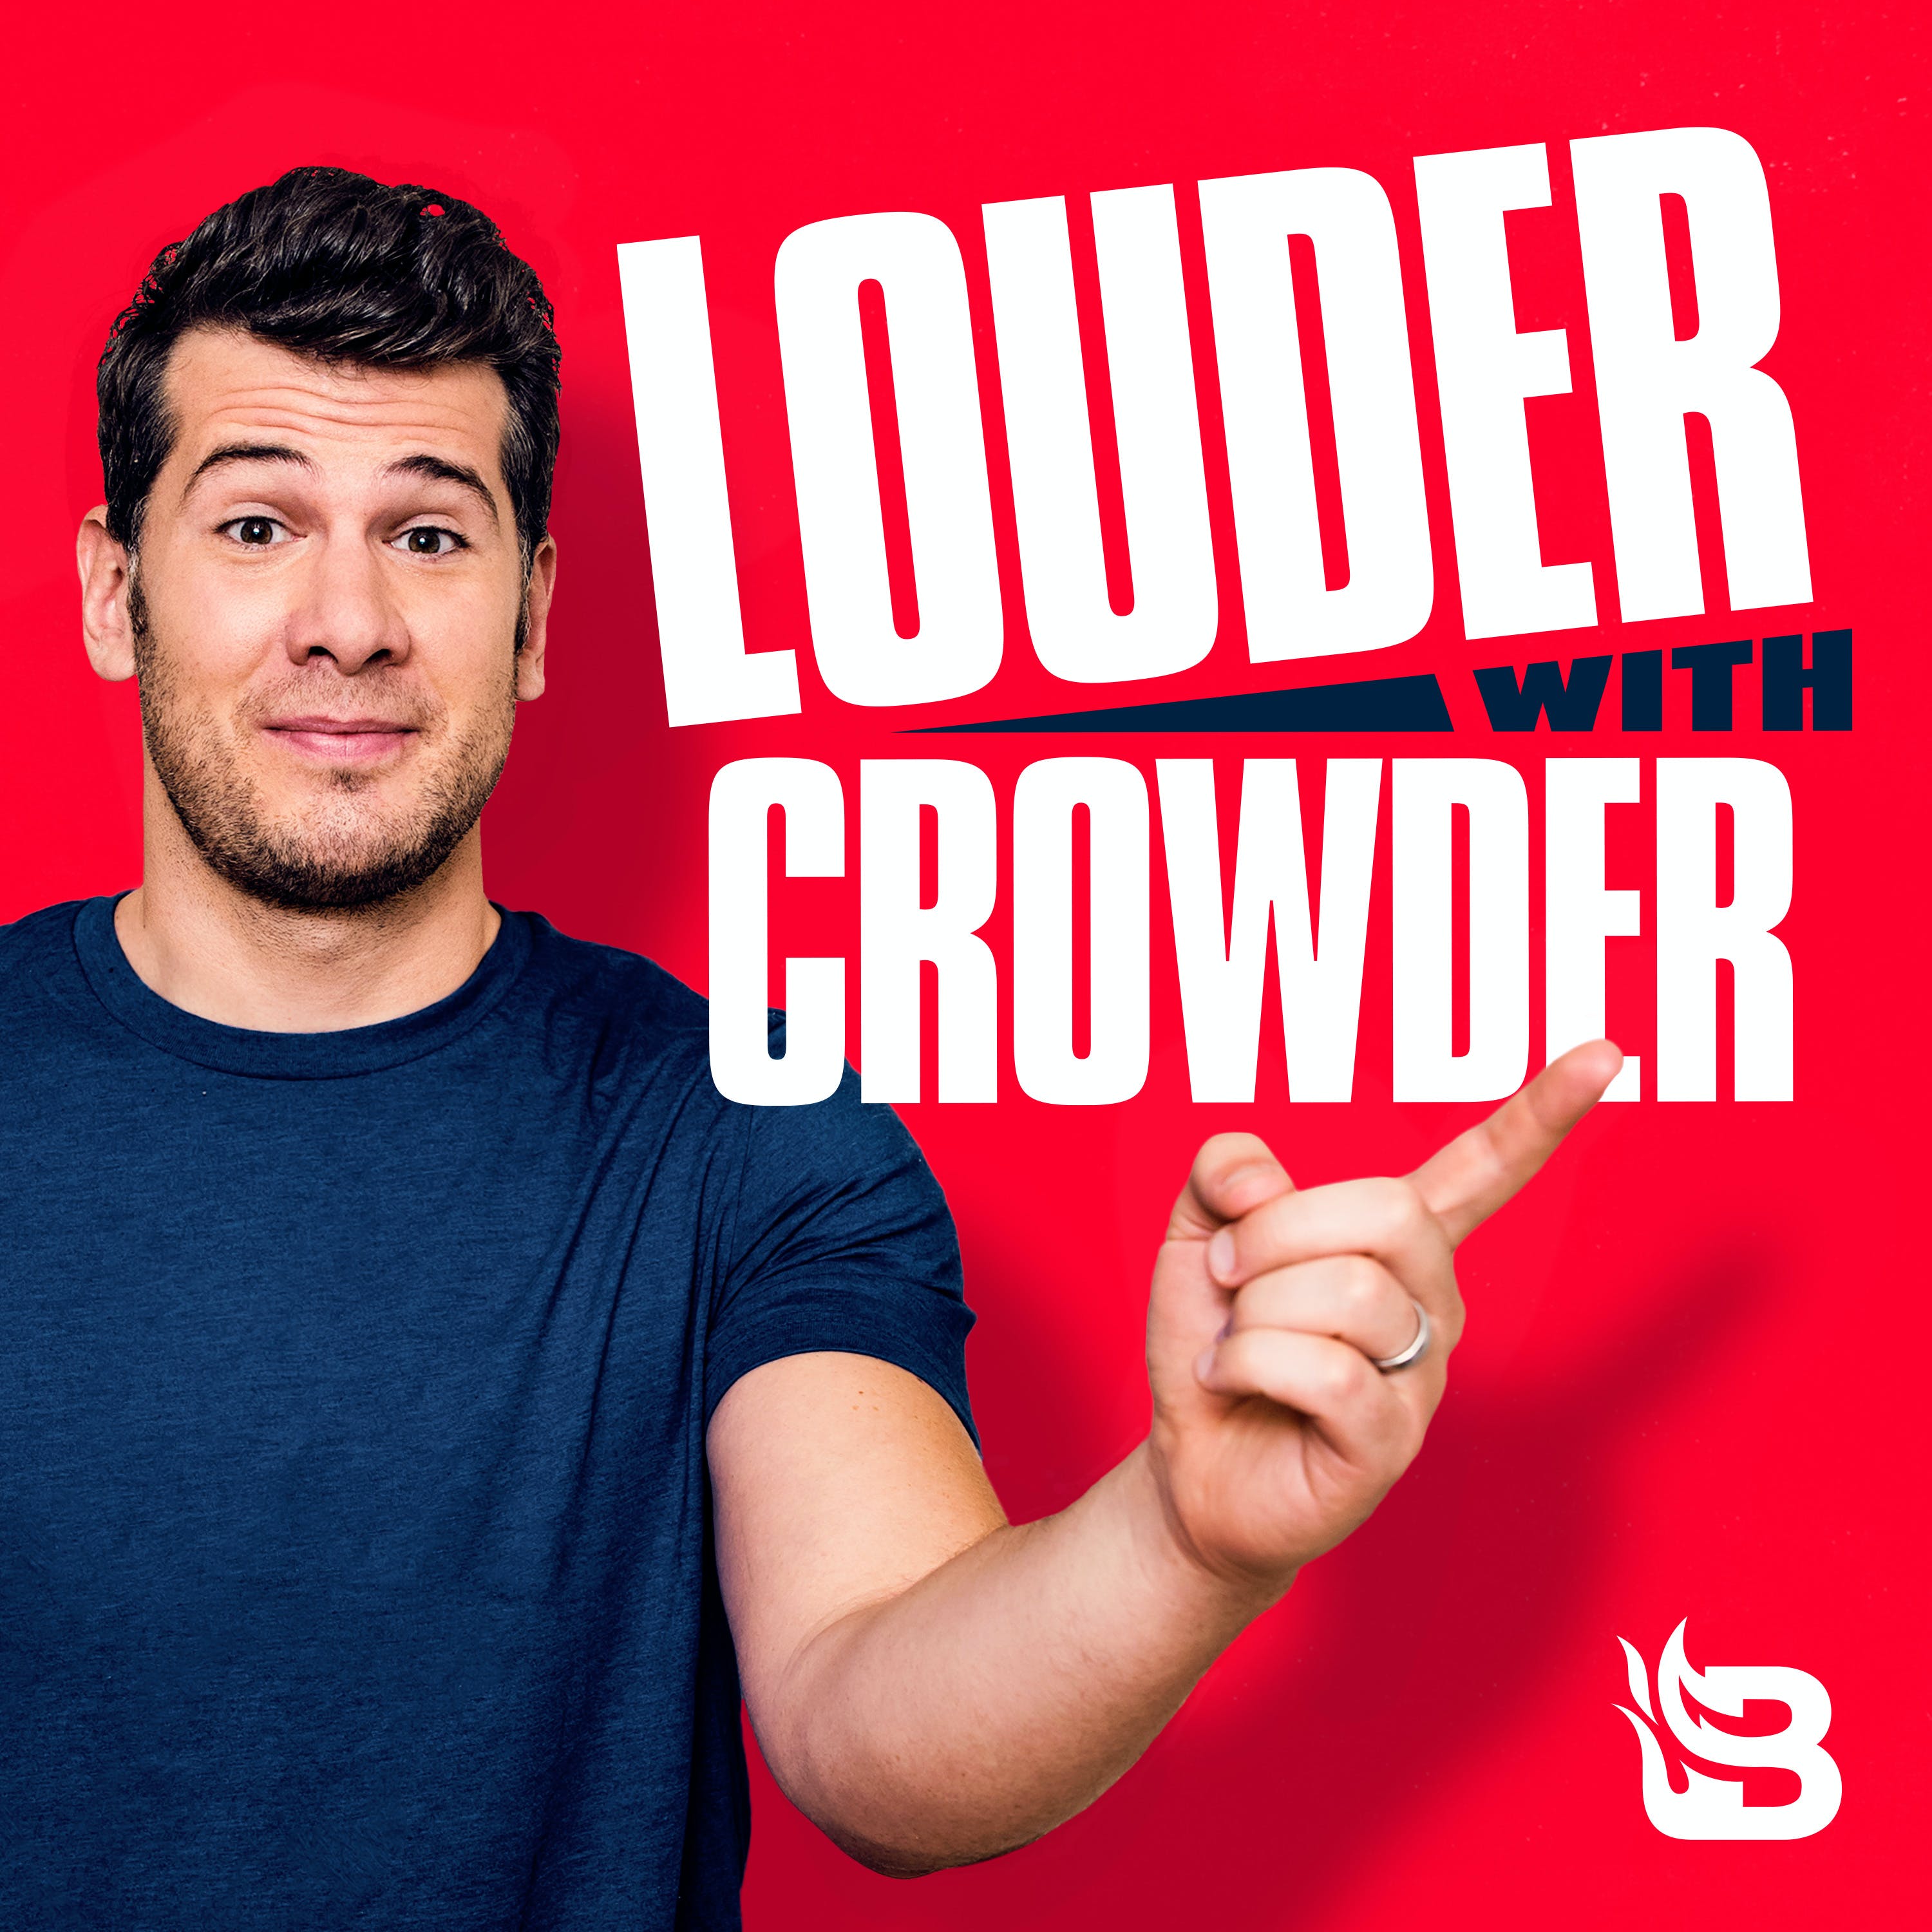 Steven Crowder Was Mugged By a 'Small Haitian' in Montreal Over Interpol Tickets